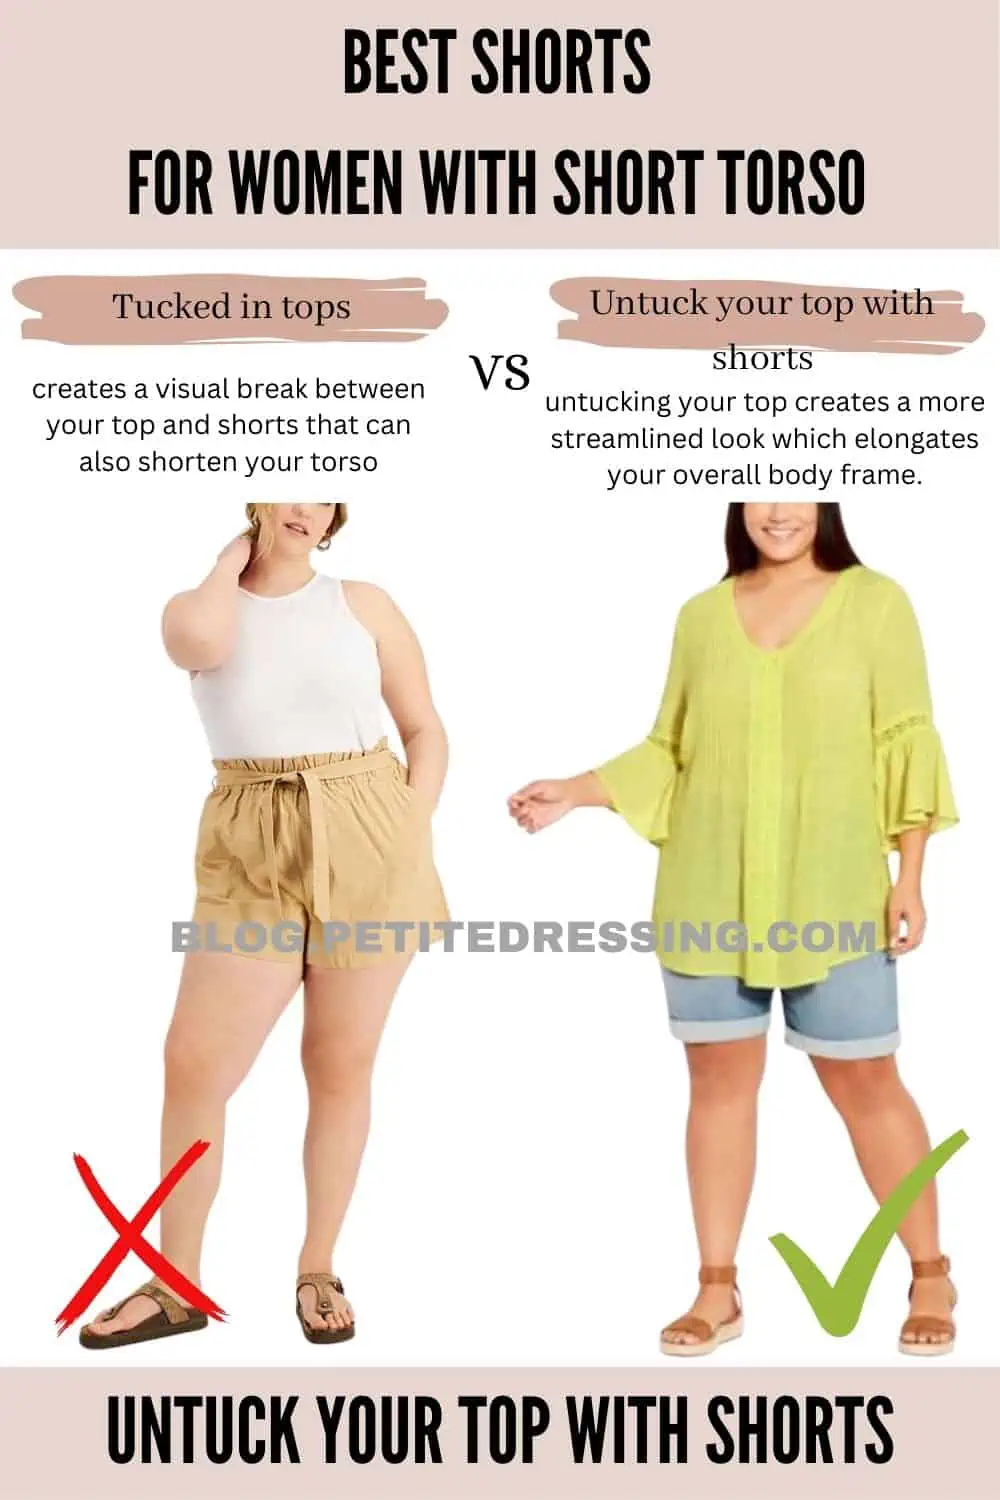 Shorts guide for women with a short torso - Petite Dressing